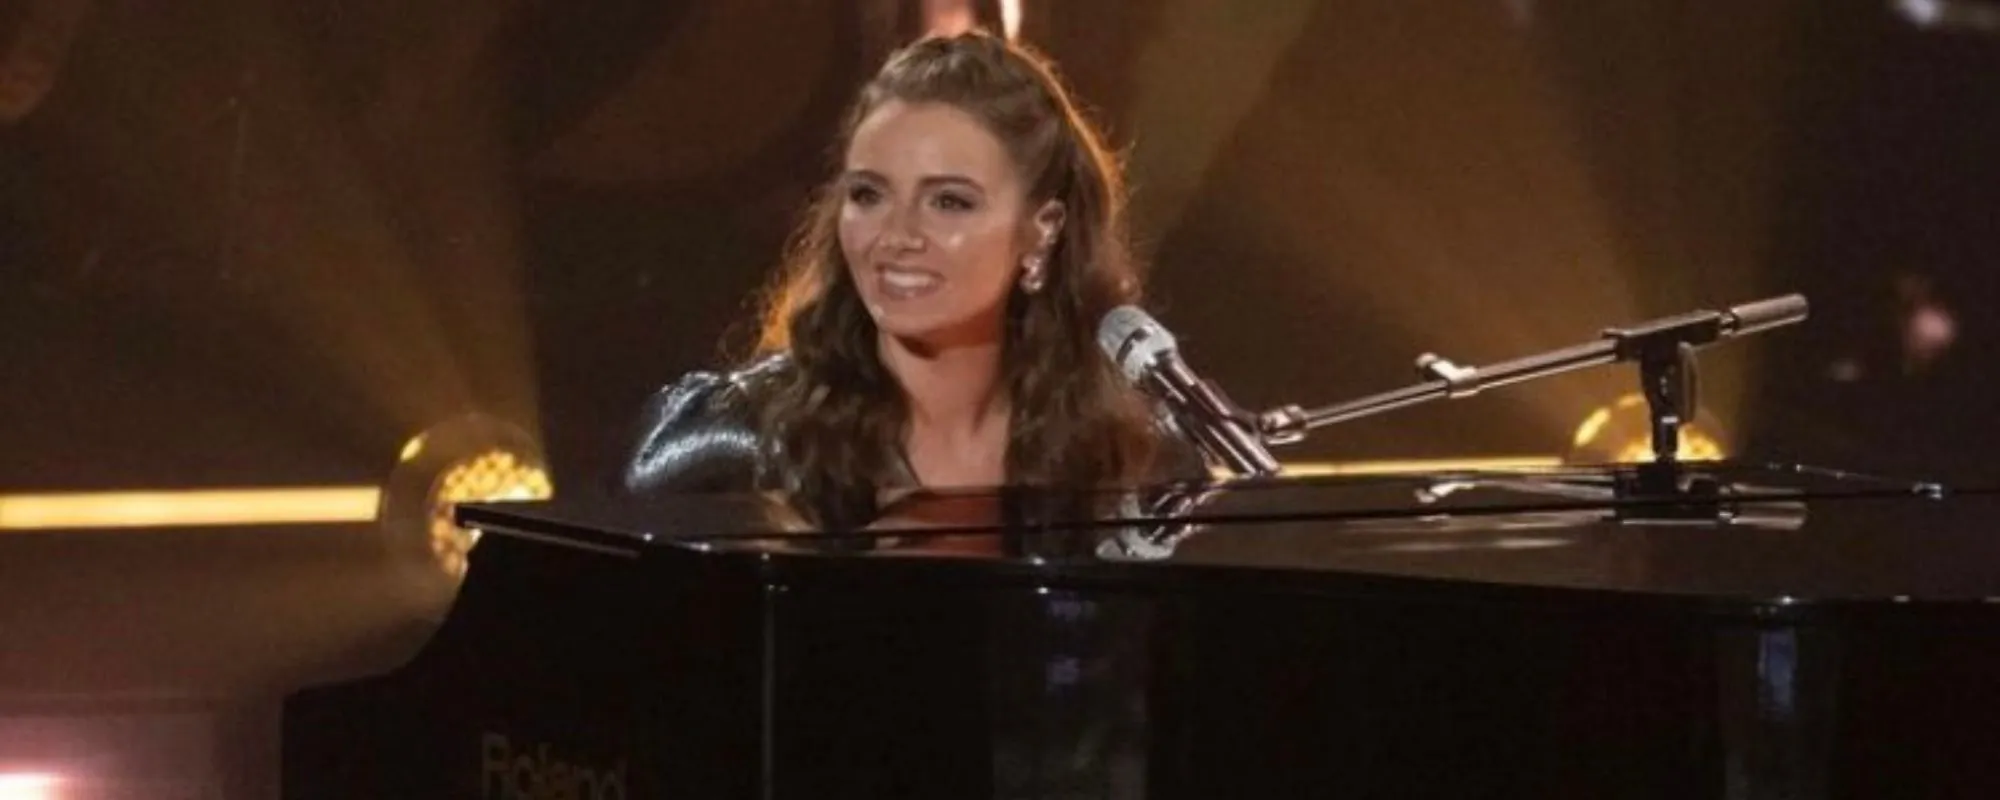 'American Idol' Contestant Clarifies Perceived Emmy Russell Snub